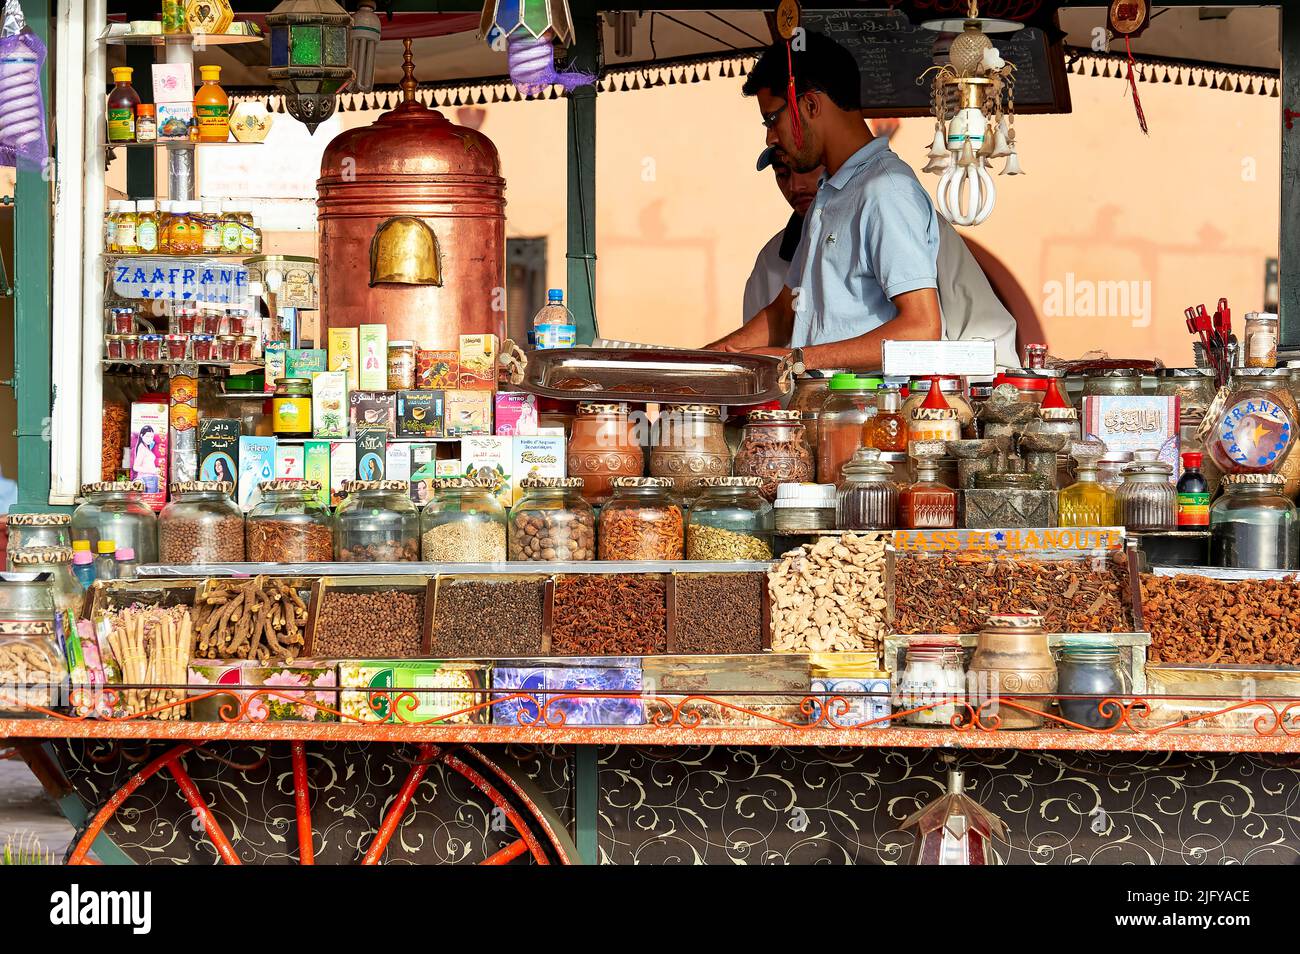 Morocco Marrakesh. Tea and spices stall at the market Stock Photo